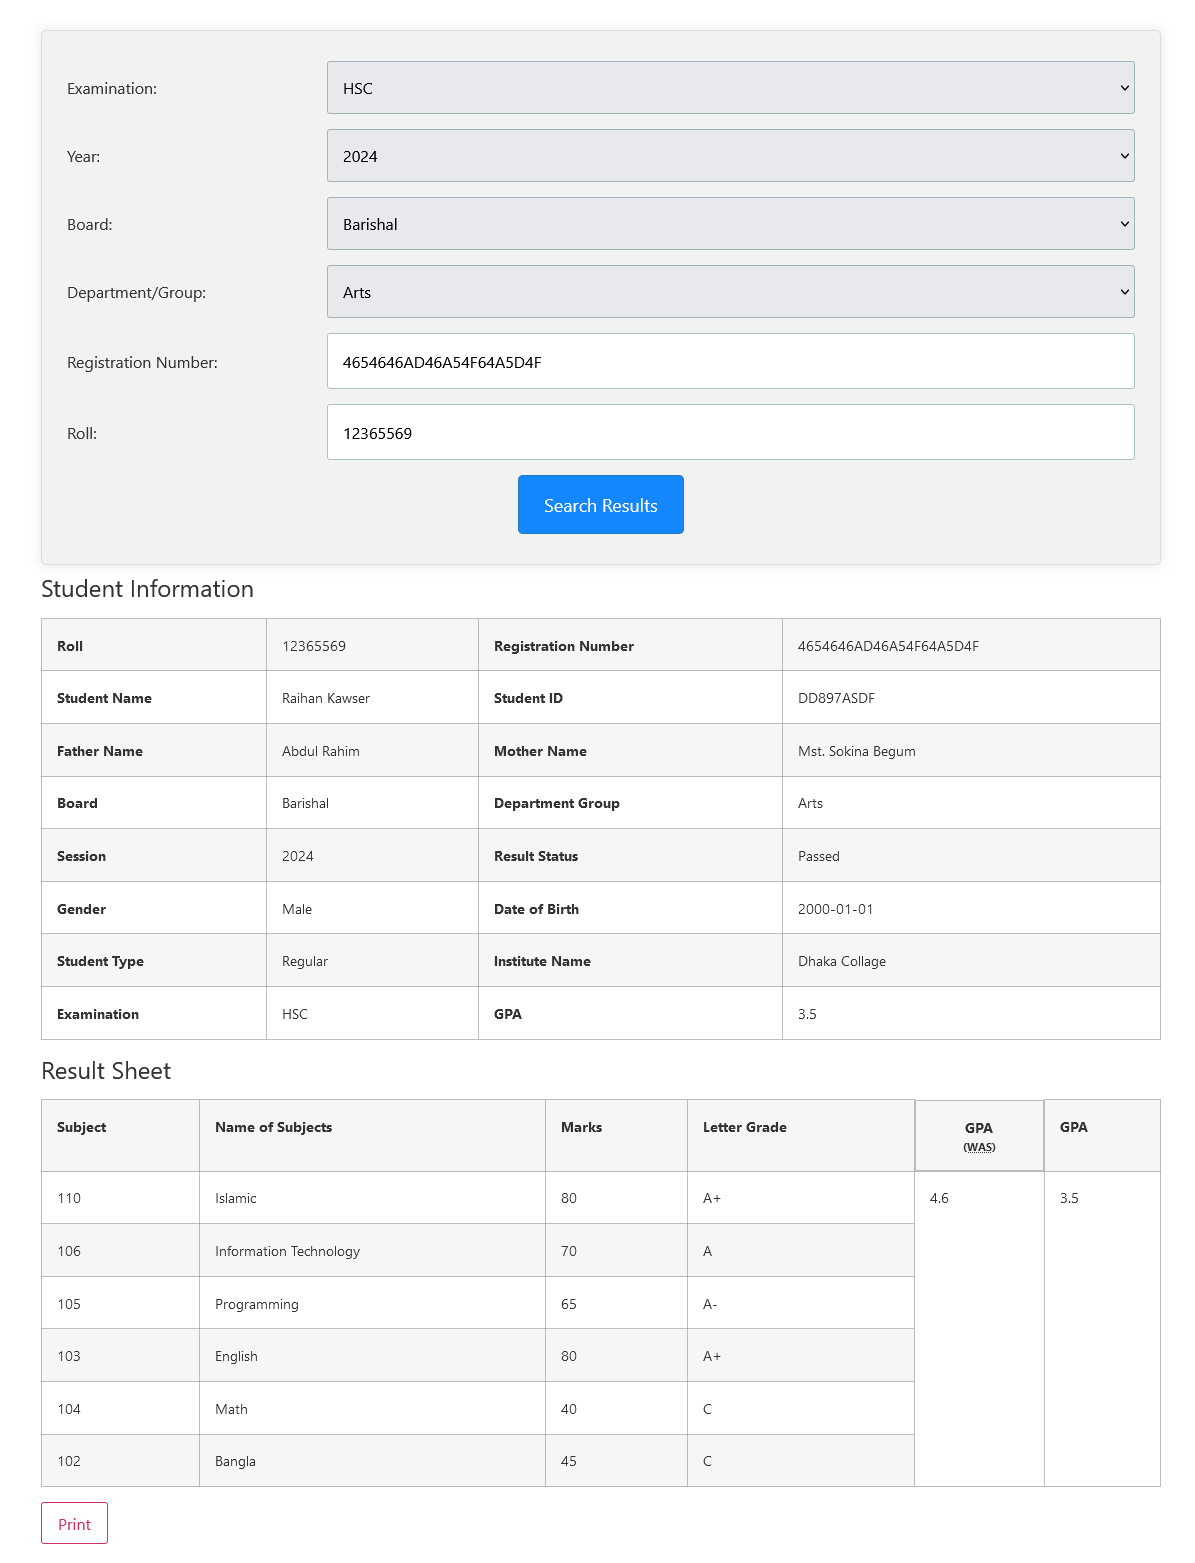 Search Form with Result Sheet